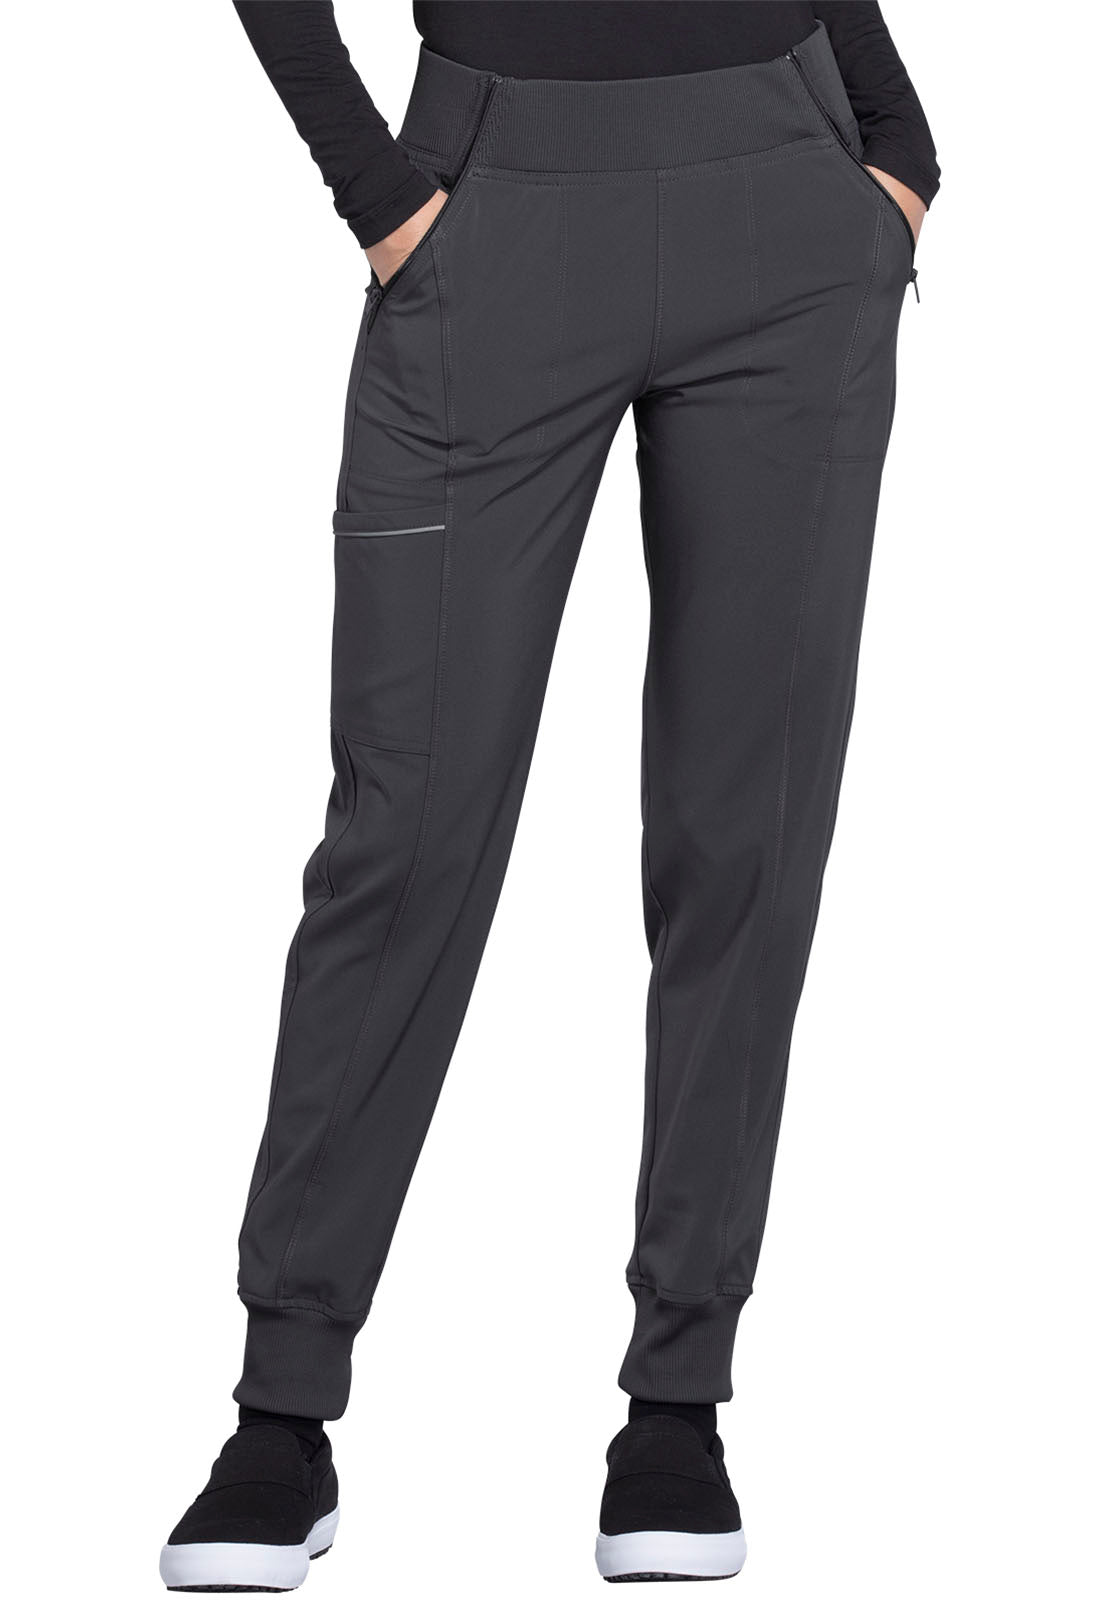 CK110A - Infinity Mid Rise Jogger